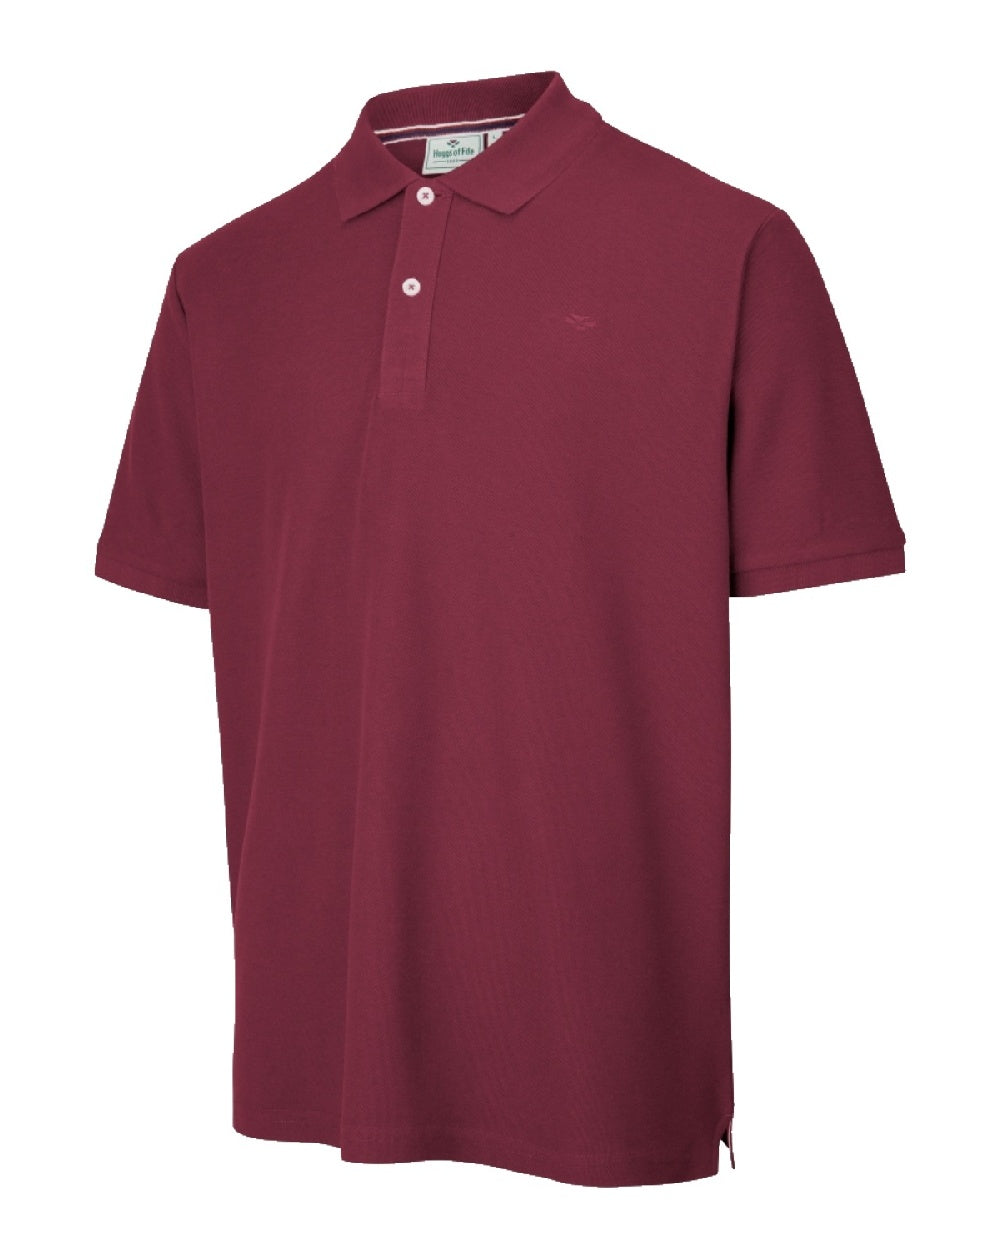 Bordeaux coloured Hoggs of Fife Largs Pique Polo Shirt on white background 